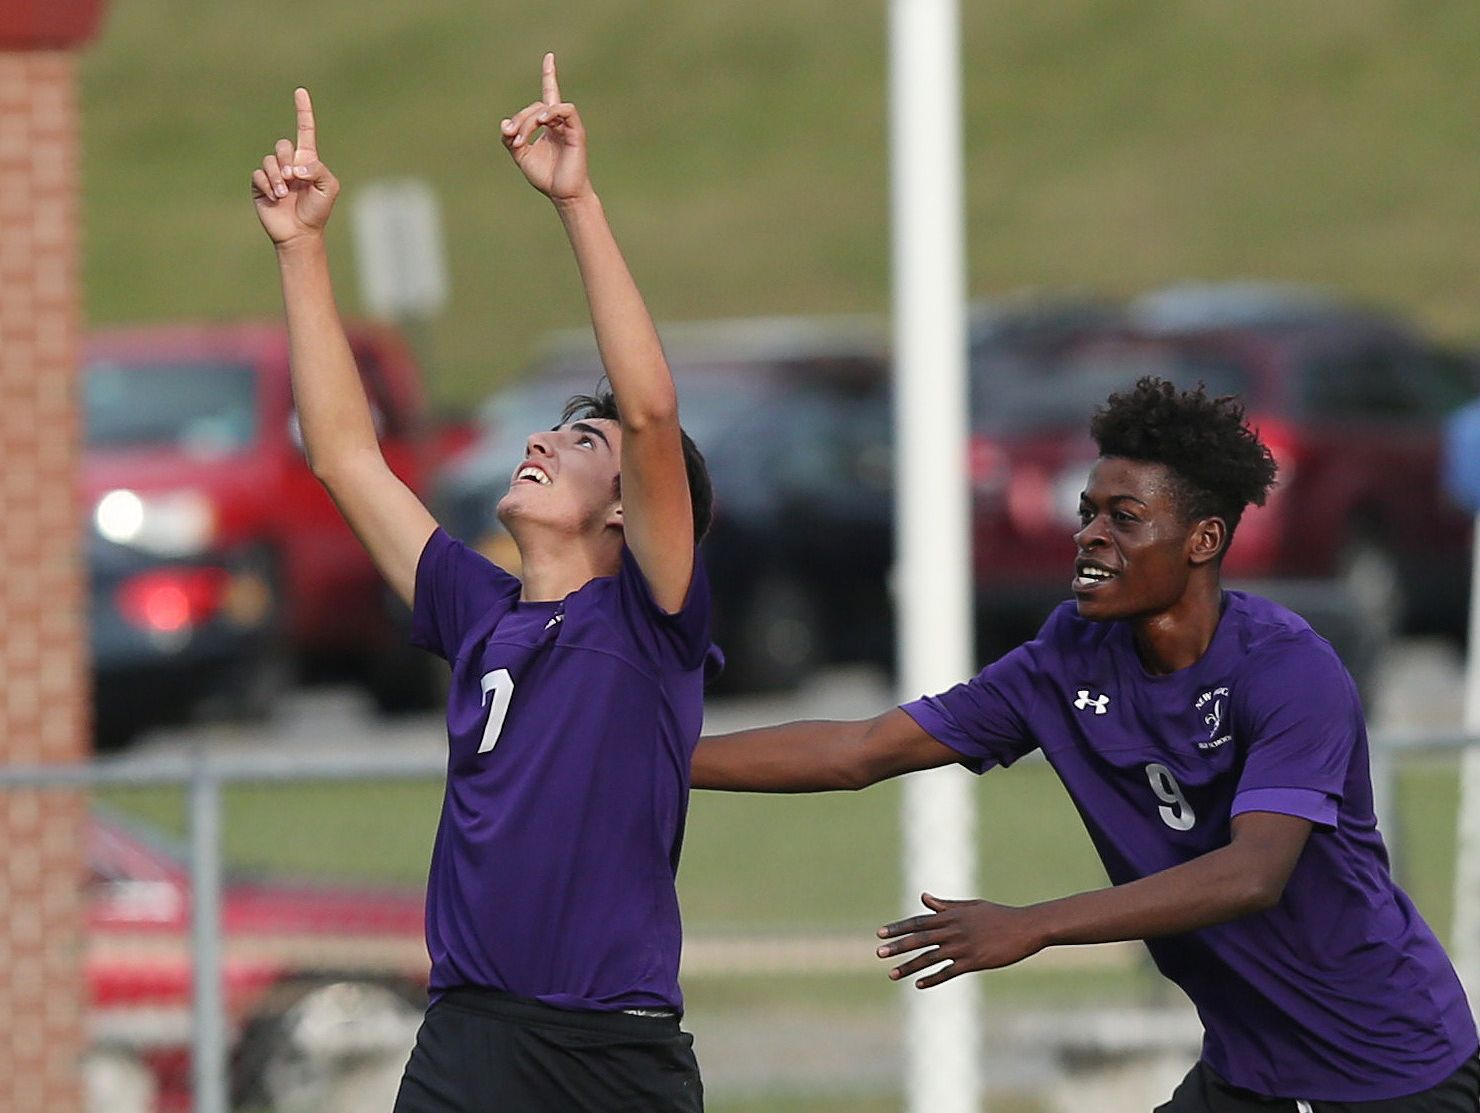 New Rochelle's Cristian Valencia (7) celebrates with teammate Stevenson Dievdonne (9) after his second goal of the first half against Arlington in the boys soccer Section 1 Class AA championship game at Lakeland High School in Shrub Oak High School Oct. 29, 2016. New Rochelle won the game 3-0.